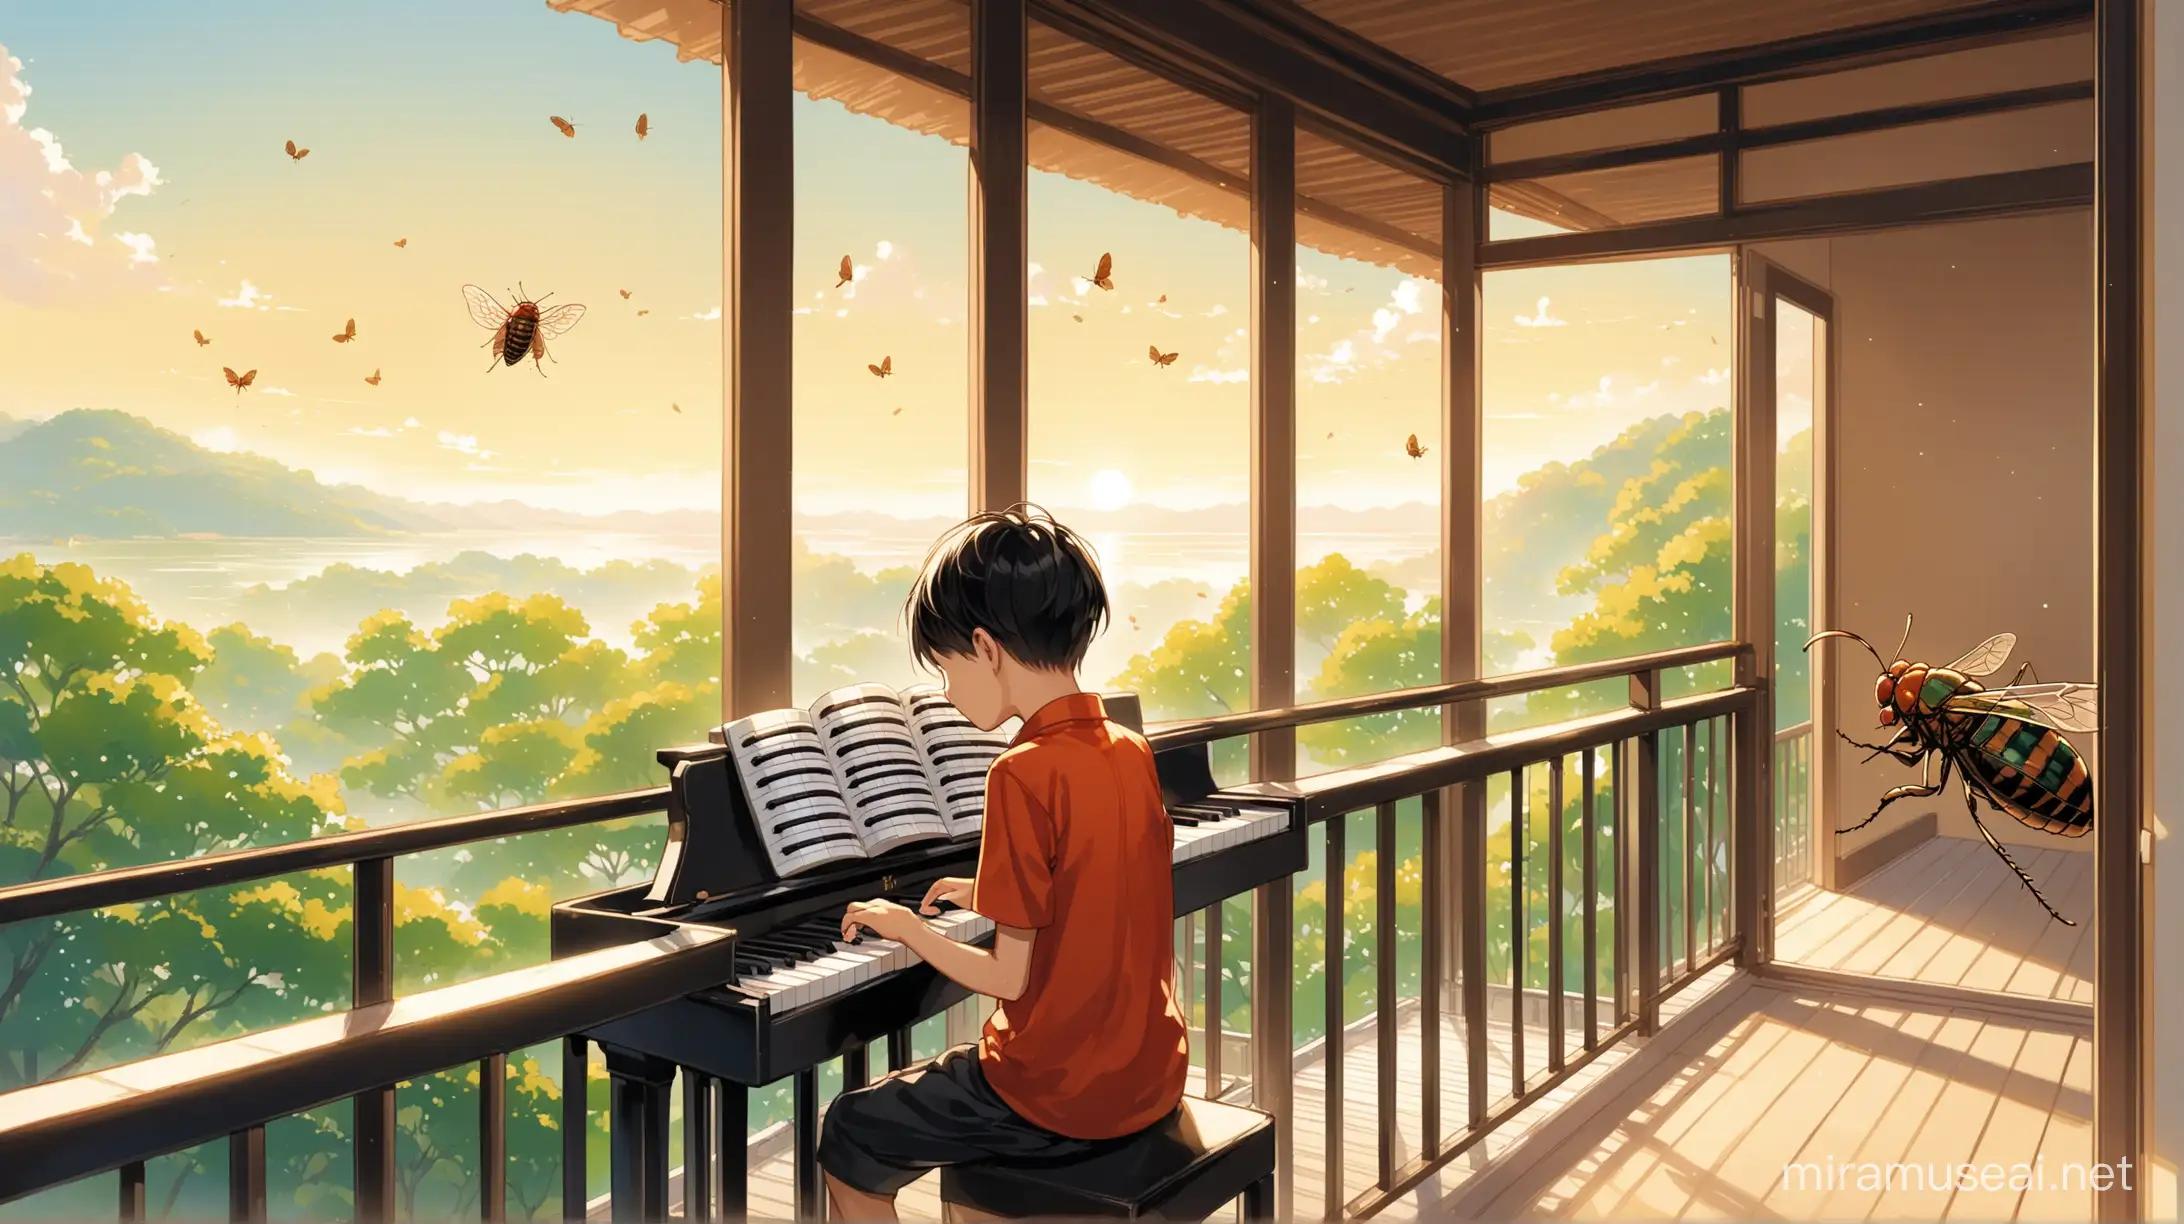 Chinese Boy Playing Piano on Balcony with Cicada Serenade